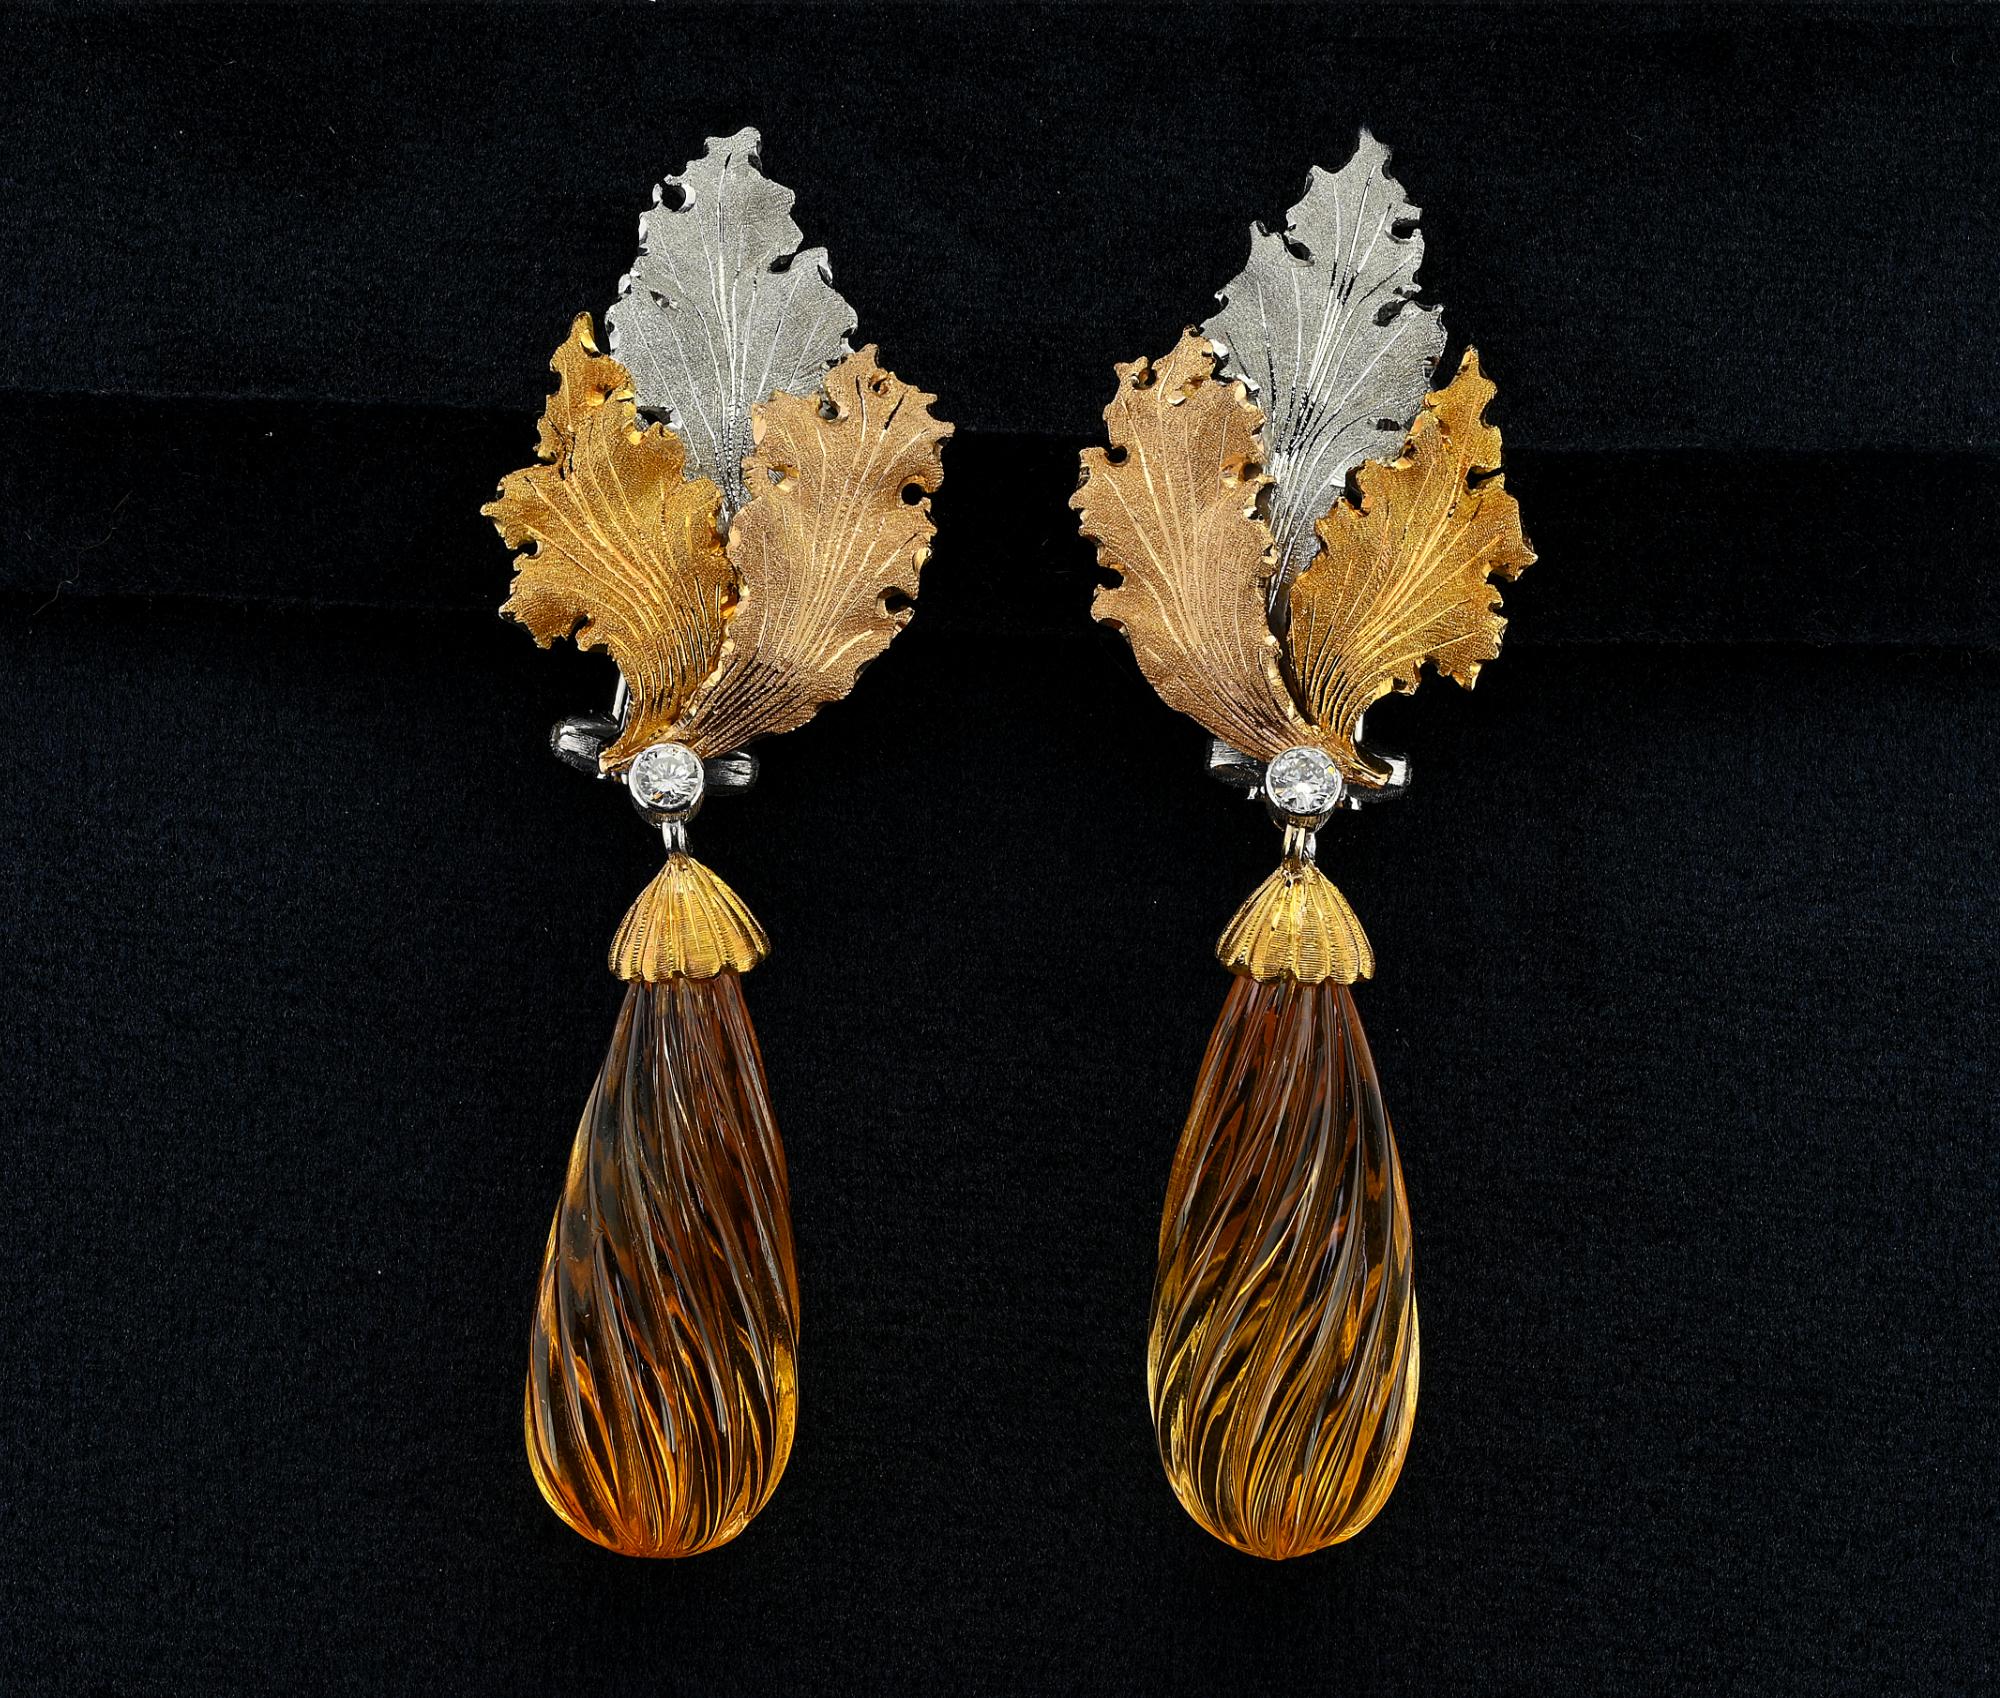 Charming pair of long drop earrings, Signed Buccellati,1980 circa
Each in foliate design made of solid 18 KT white and yellow, set with round brilliant cut diamond
Suspending a carved Citrine drop of lovely color Diamond approx 24.0 Carats for both